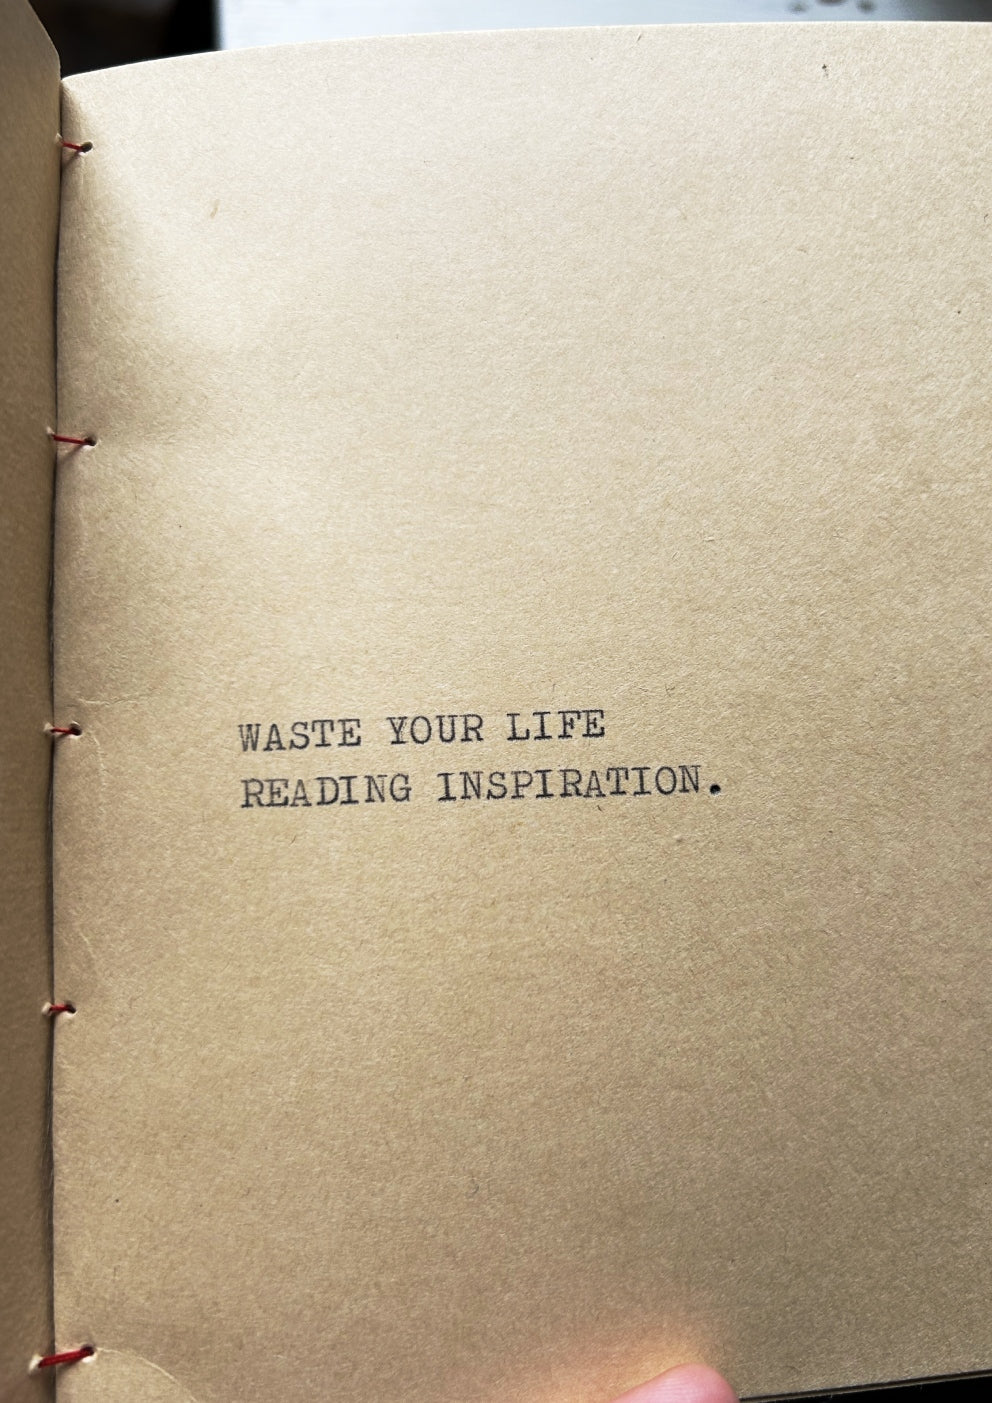 Waste Your Life poem - hand made/typed/stiched booklet (limited edition of 30)